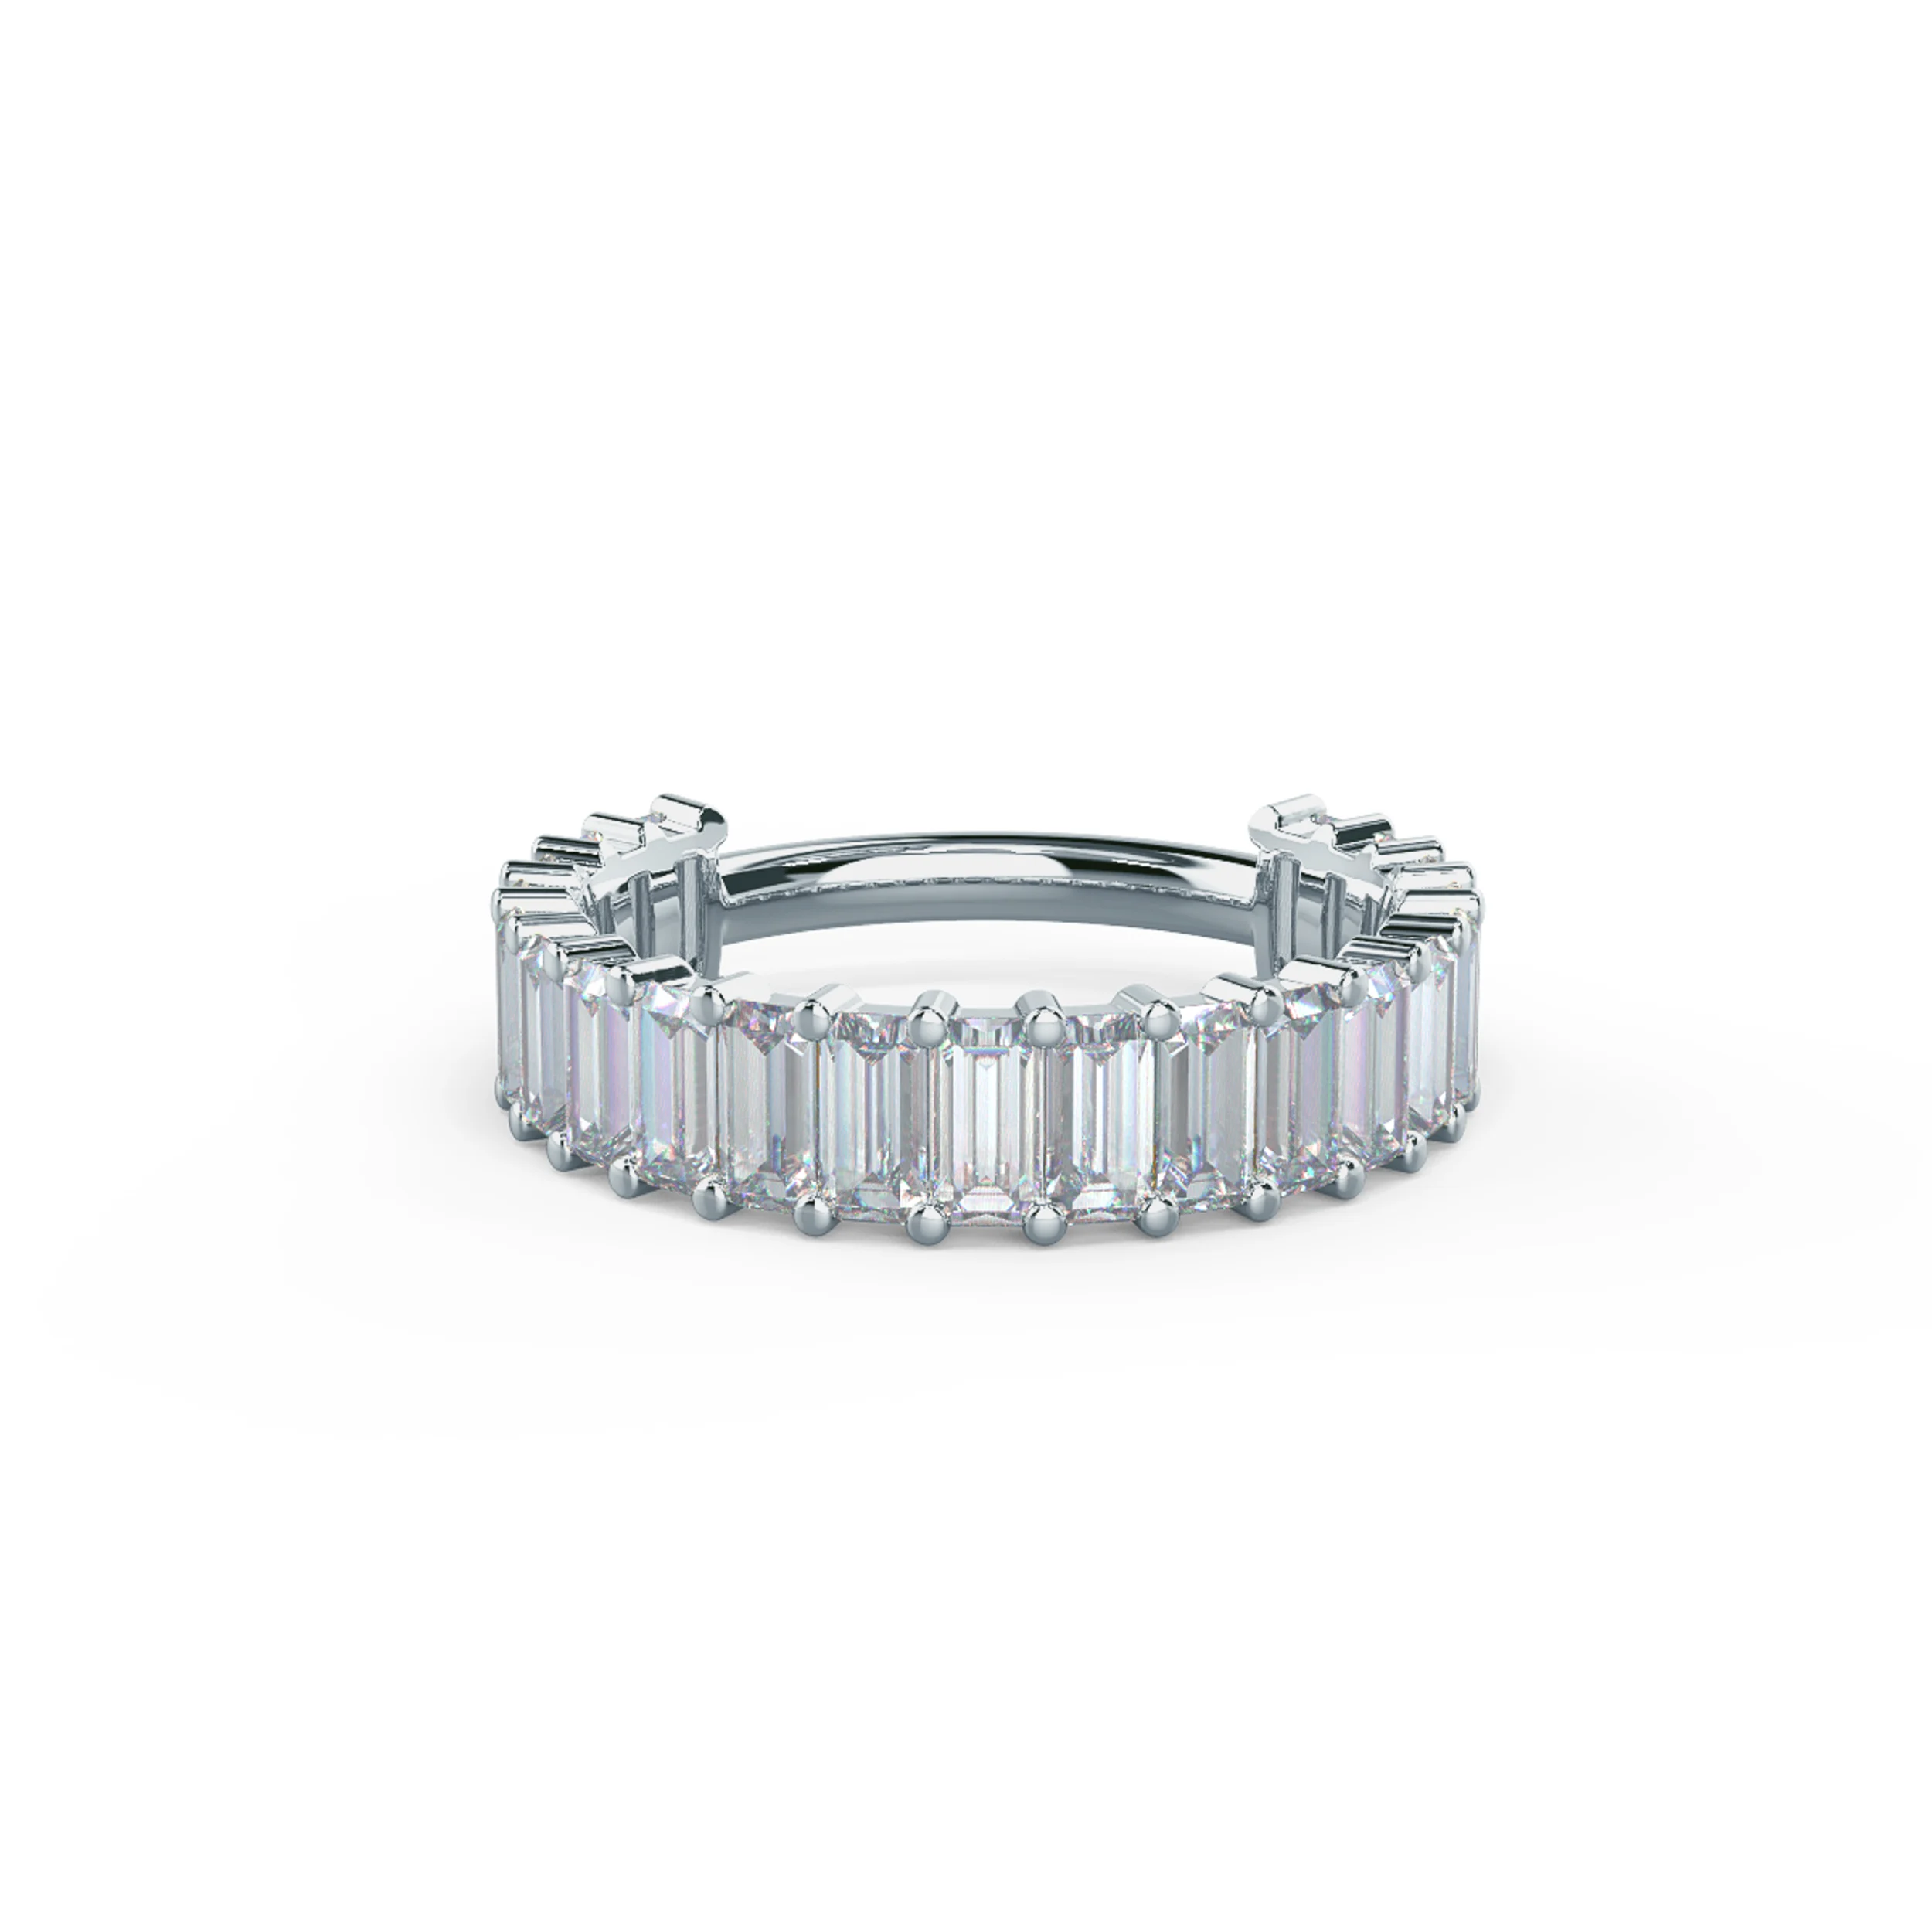 Hand Selected 2.1 ct Diamonds set in 18k White Gold Baguette Three Quarter Band (Main View)